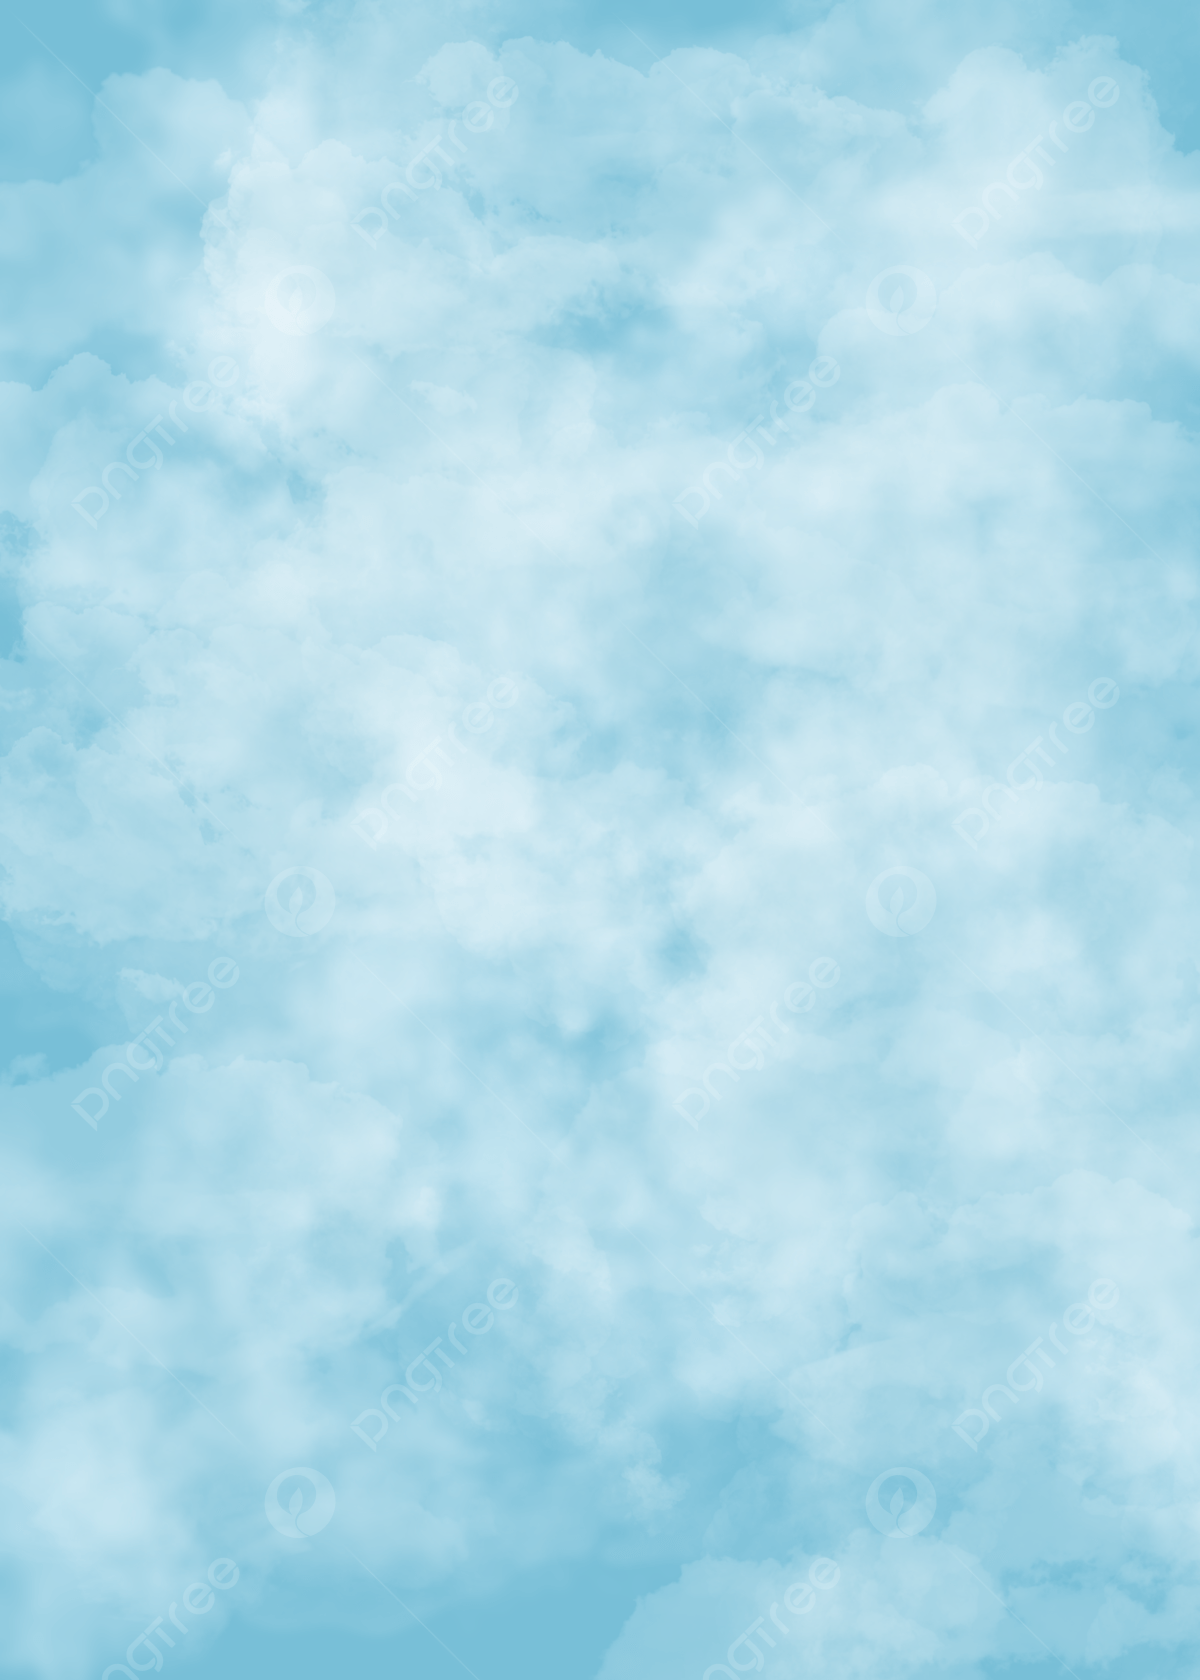 A blue sky with clouds and some white dots - Pastel blue